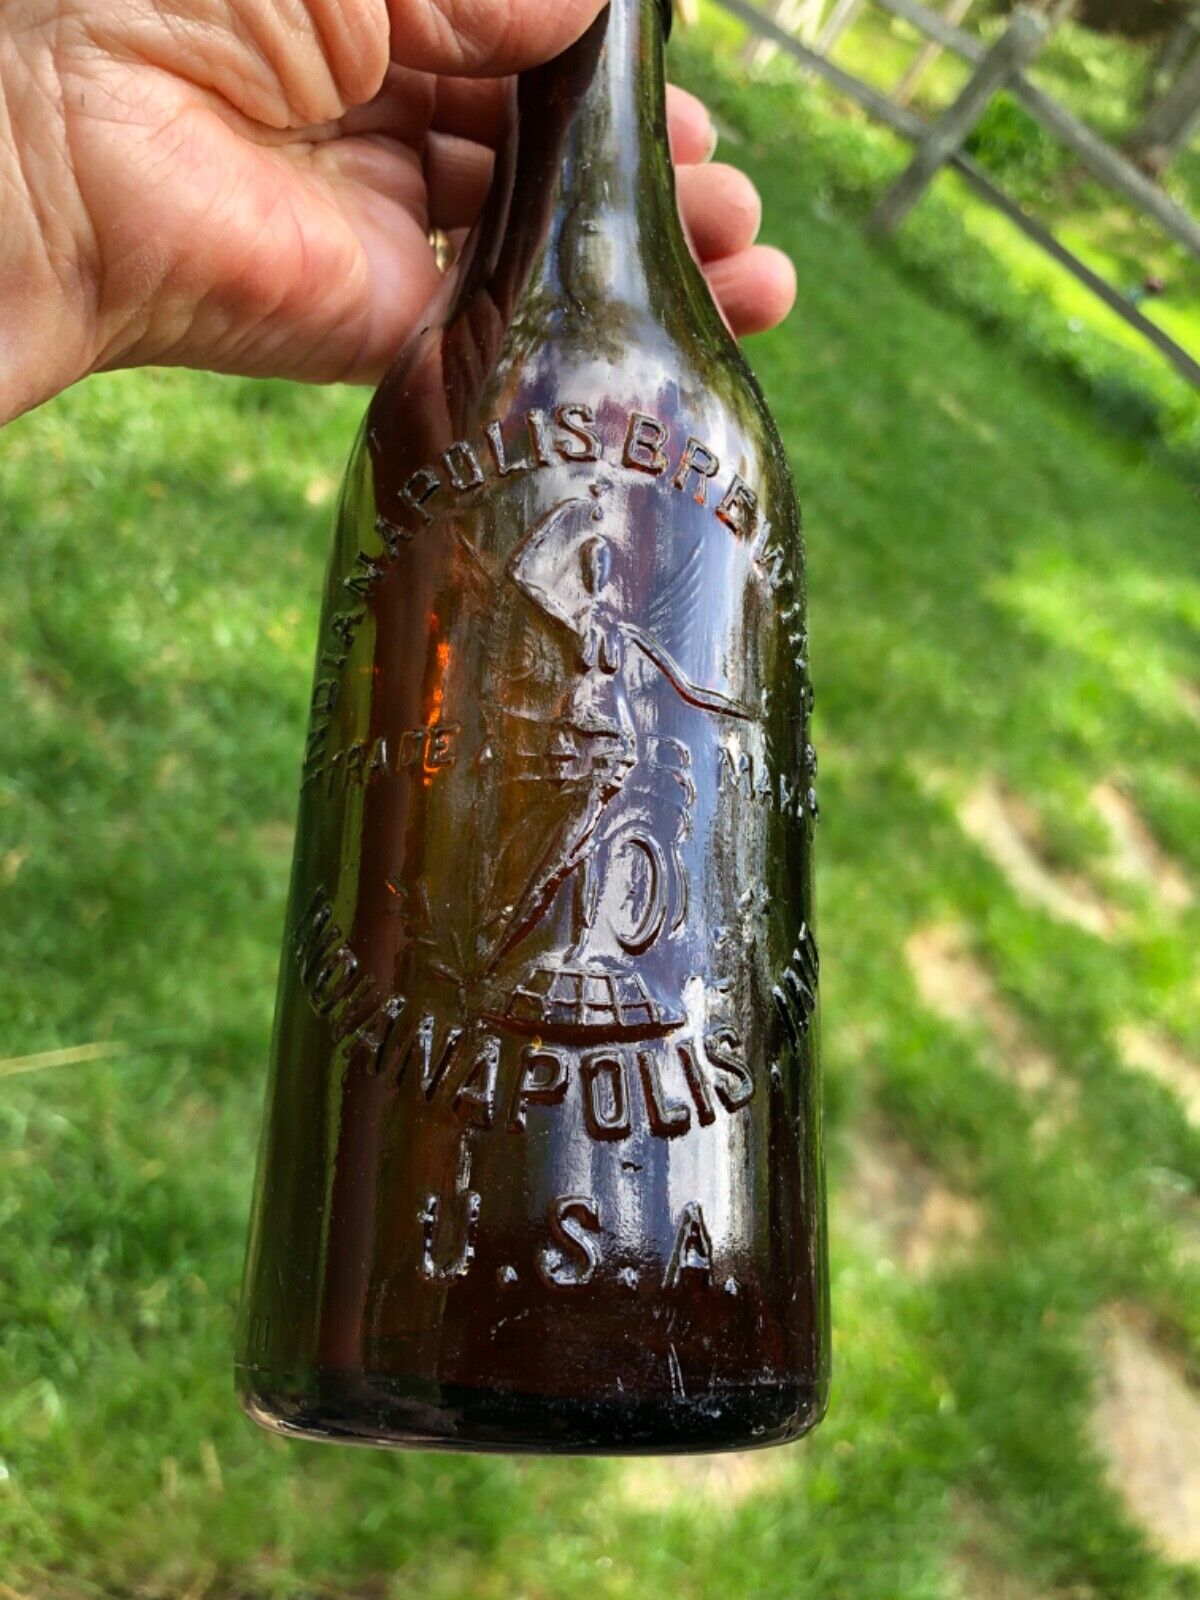 Indianapolis Brewing Co Brown Bottle Winged Lady Nymph Heavily Embossed